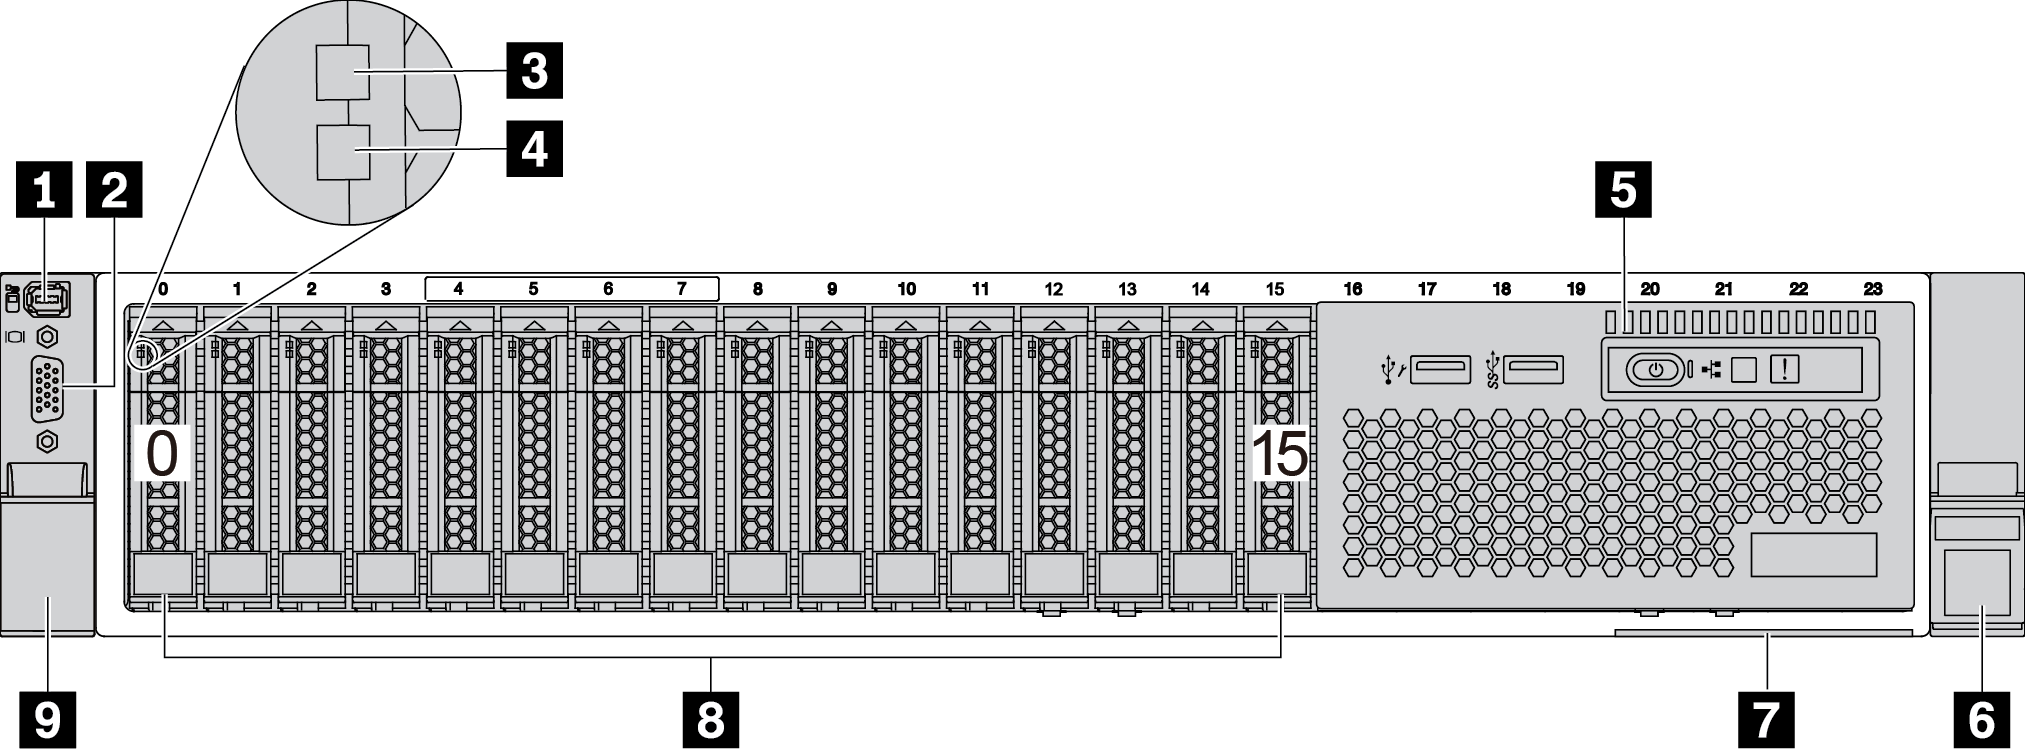 Front view of server models with sixteen 2.5-inch drive bays (with LCD diagnostics panel)